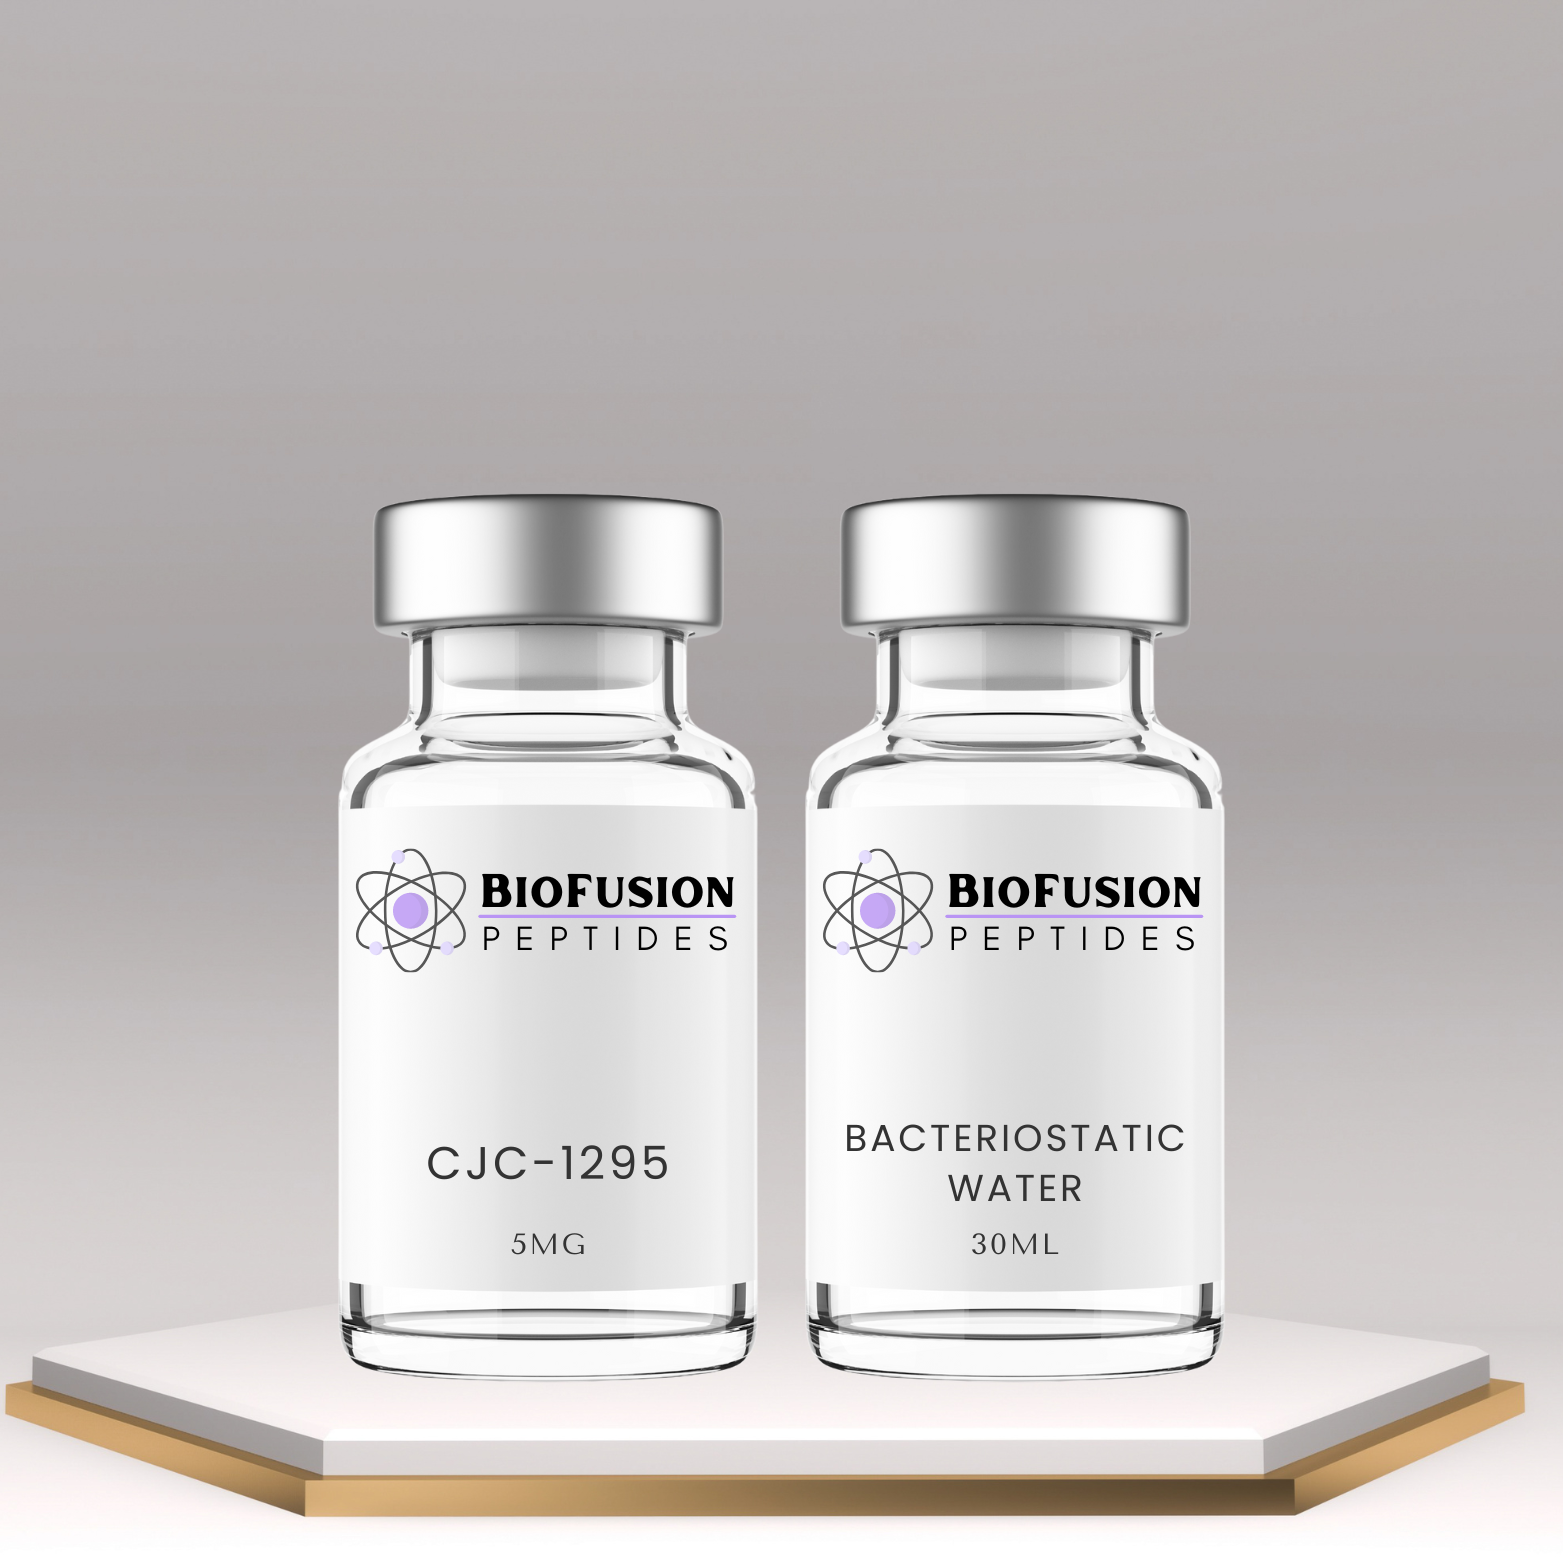 BioFusion Peptides CJC-1295 kit with bacteriostatic water